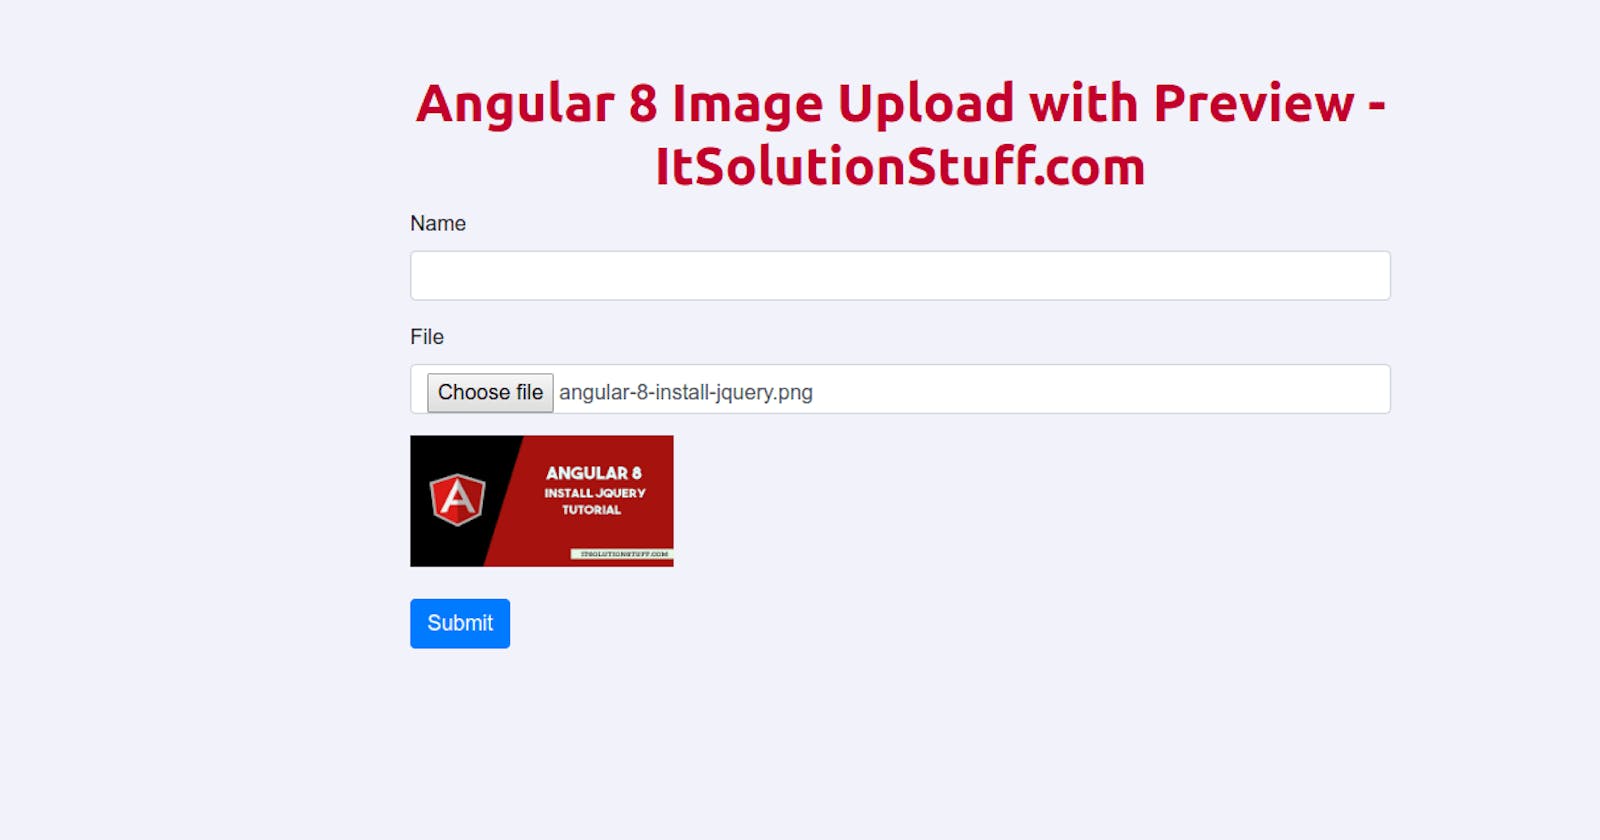 Image Upload and Preview in Angular 8